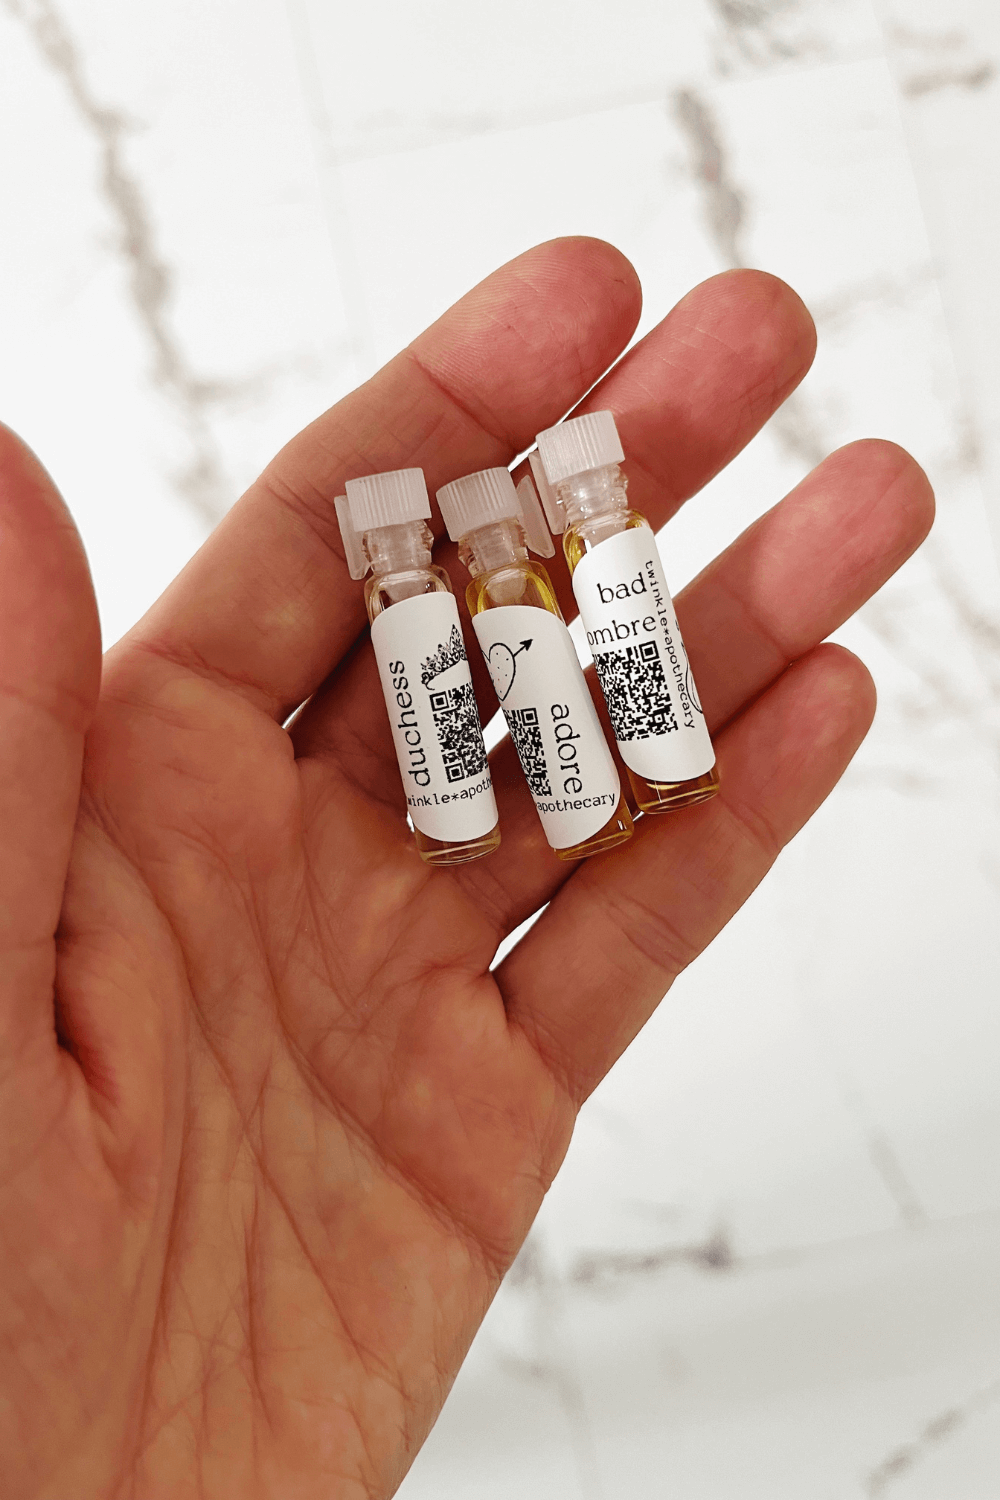 samples of adore, bad hombre, and duchess natural perfumes by twinkle apothecary 